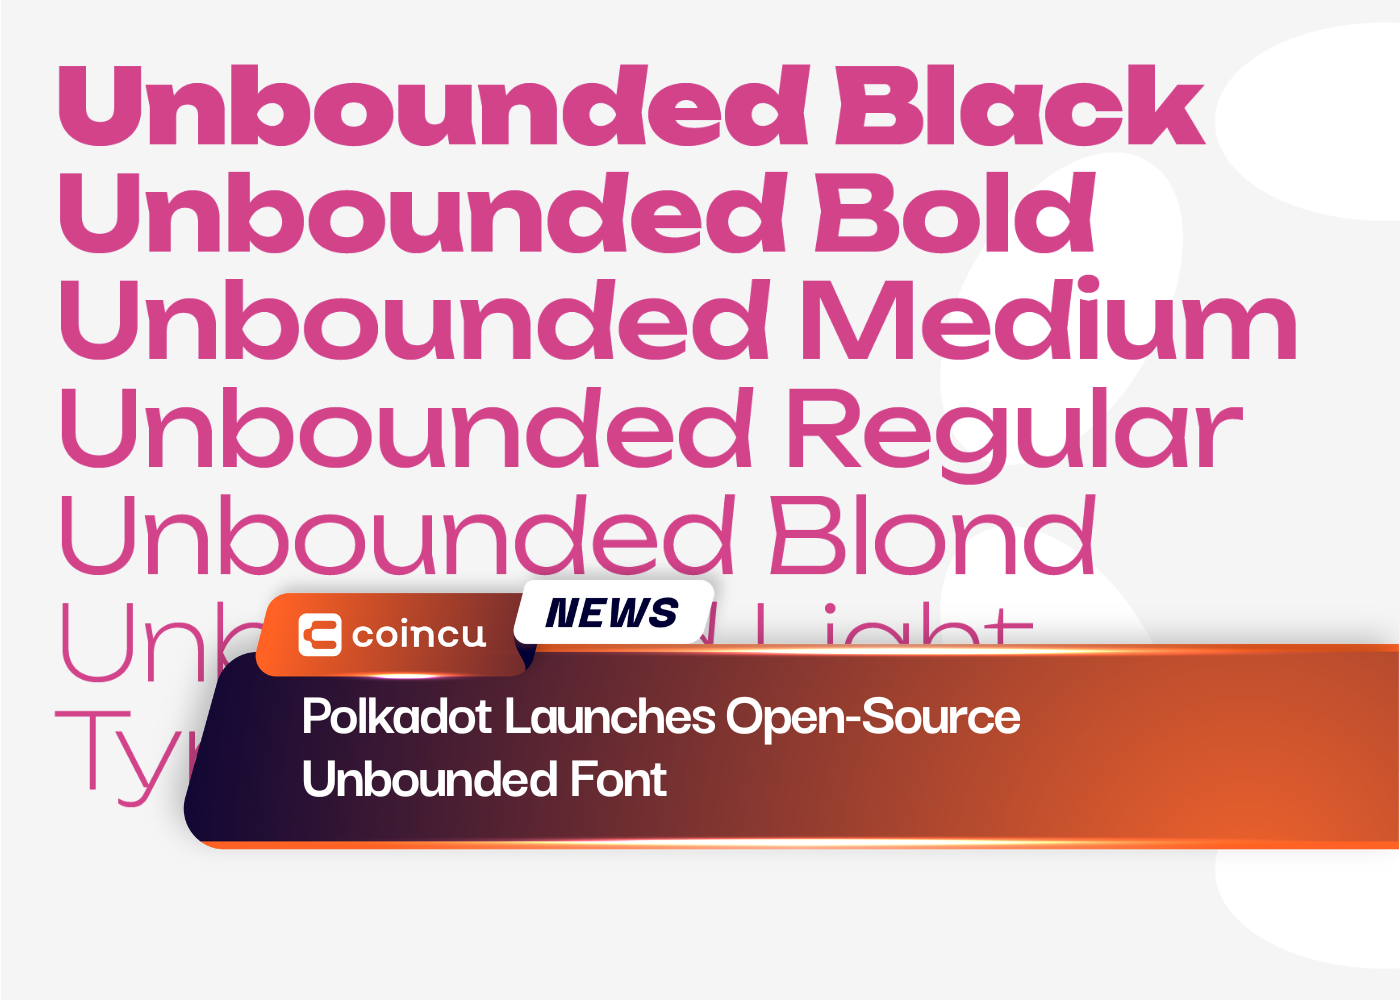 Polkadot Launches Open-Source Unbounded Font